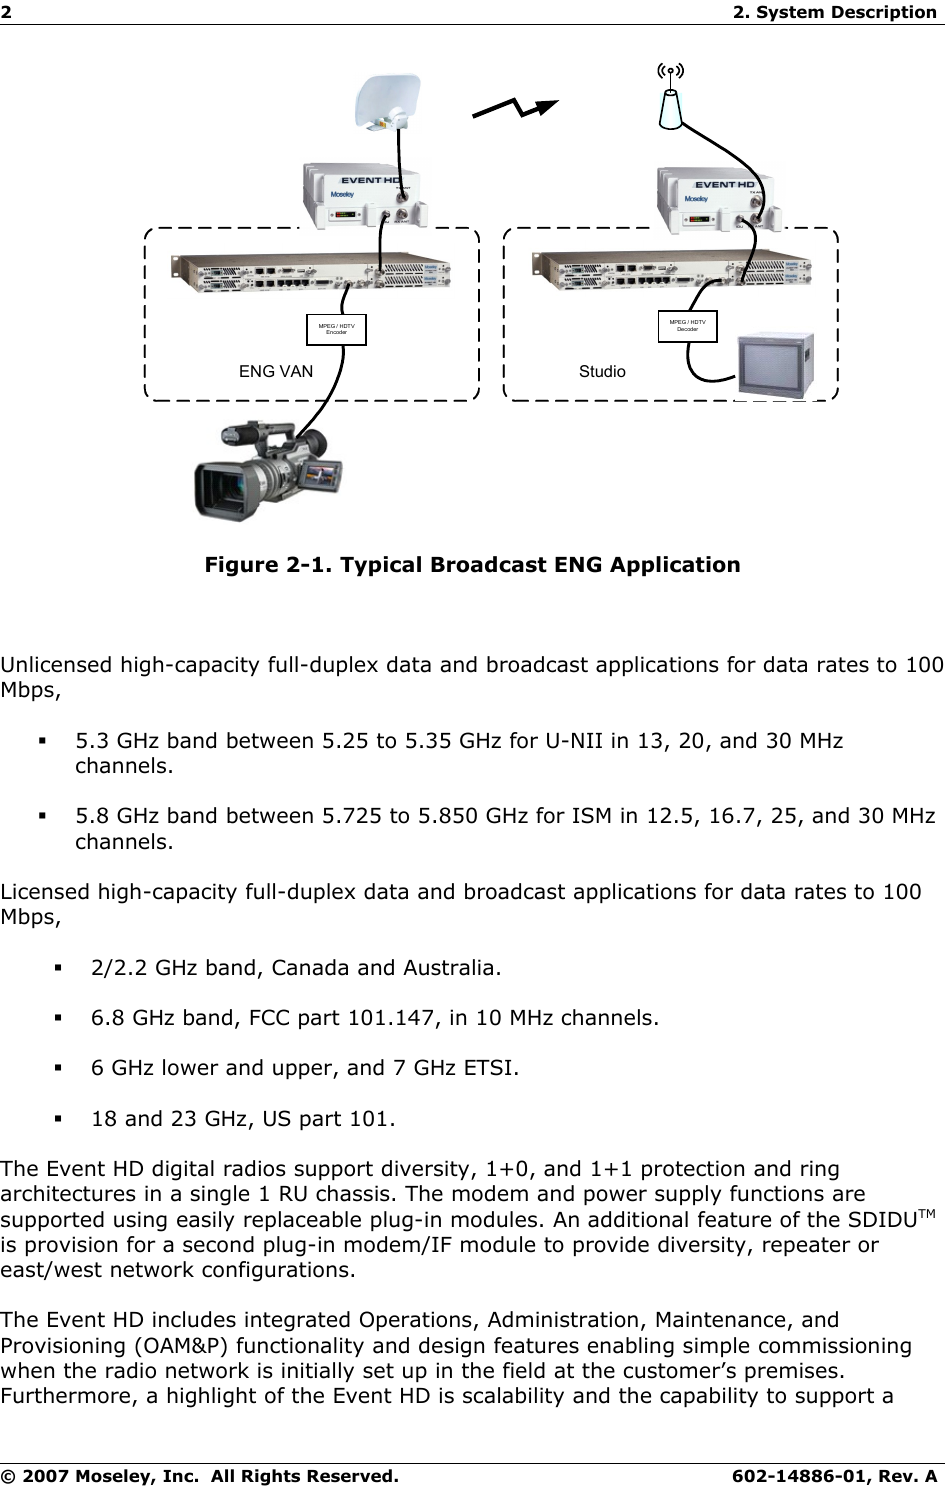 2 2. System DescriptionENG VAN StudioMPEG / HDTVEncoderMPEG / HDTVDecoderFigure 2-1. Typical Broadcast ENG ApplicationUnlicensed high-capacity full-duplex data and broadcast applications for data rates to 100 Mbps,5.3 GHz band between 5.25 to 5.35 GHz for U-NII in 13, 20, and 30 MHz channels.5.8 GHz band between 5.725 to 5.850 GHz for ISM in 12.5, 16.7, 25, and 30 MHz channels.Licensed high-capacity full-duplex data and broadcast applications for data rates to 100 Mbps,2/2.2 GHz band, Canada and Australia.6.8 GHz band, FCC part 101.147, in 10 MHz channels.6 GHz lower and upper, and 7 GHz ETSI.18 and 23 GHz, US part 101.The Event HD digital radios support diversity, 1+0, and 1+1 protection and ring architectures in a single 1 RU chassis. The modem and power supply functions are supported using easily replaceable plug-in modules. An additional feature of the SDIDUTM is provision for a second plug-in modem/IF module to provide diversity, repeater or east/west network configurations.The Event HD includes integrated Operations, Administration, Maintenance, and Provisioning (OAM&amp;P) functionality and design features enabling simple commissioning when the radio network is initially set up in the field at the customer’s premises. Furthermore, a highlight of the Event HD is scalability and the capability to support a © 2007 Moseley, Inc.  All Rights Reserved. 602-14886-01, Rev. A